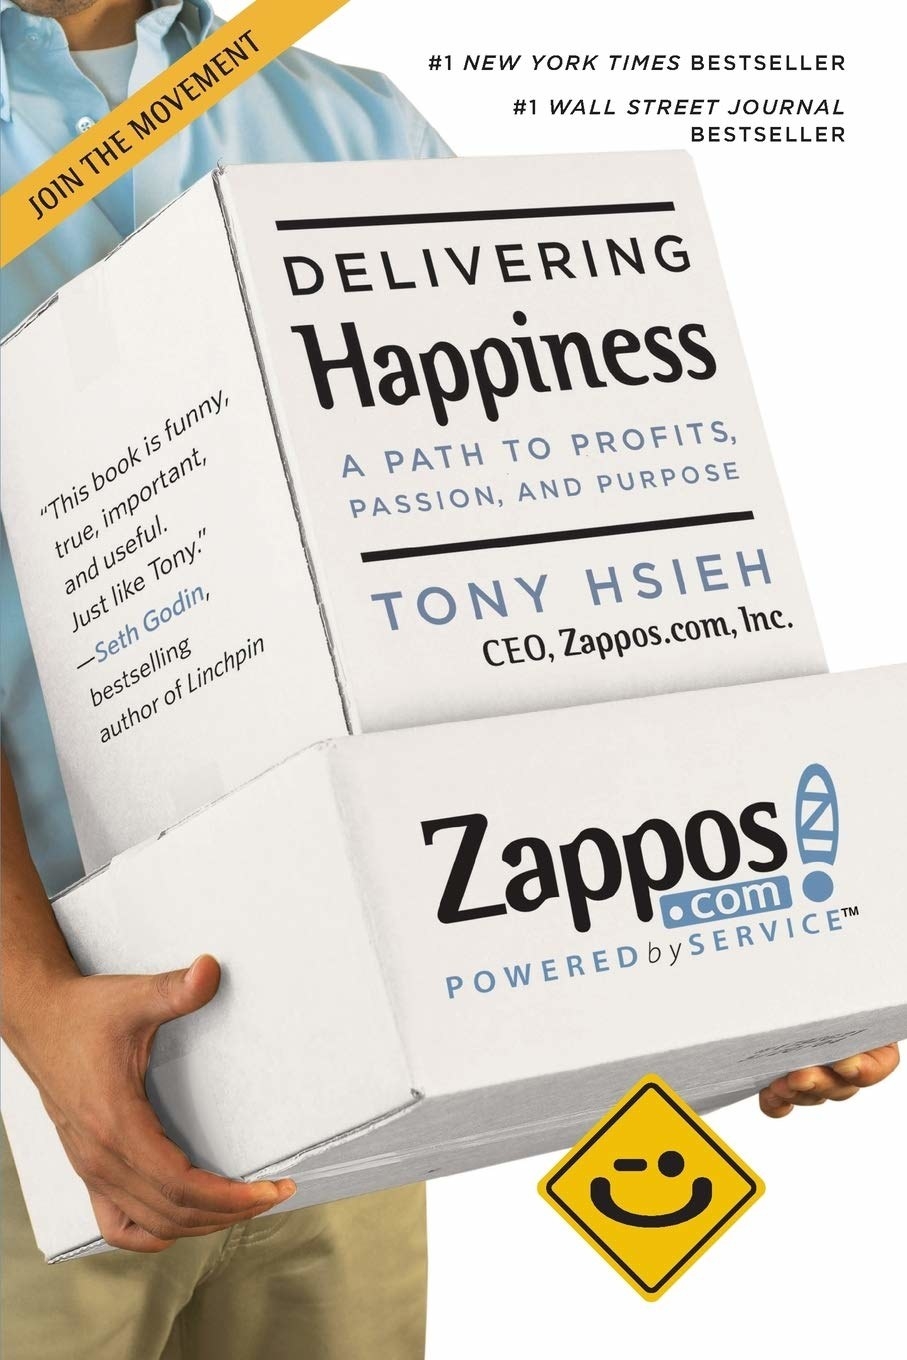 person holding a box that has the book details on it and the Zappos logo